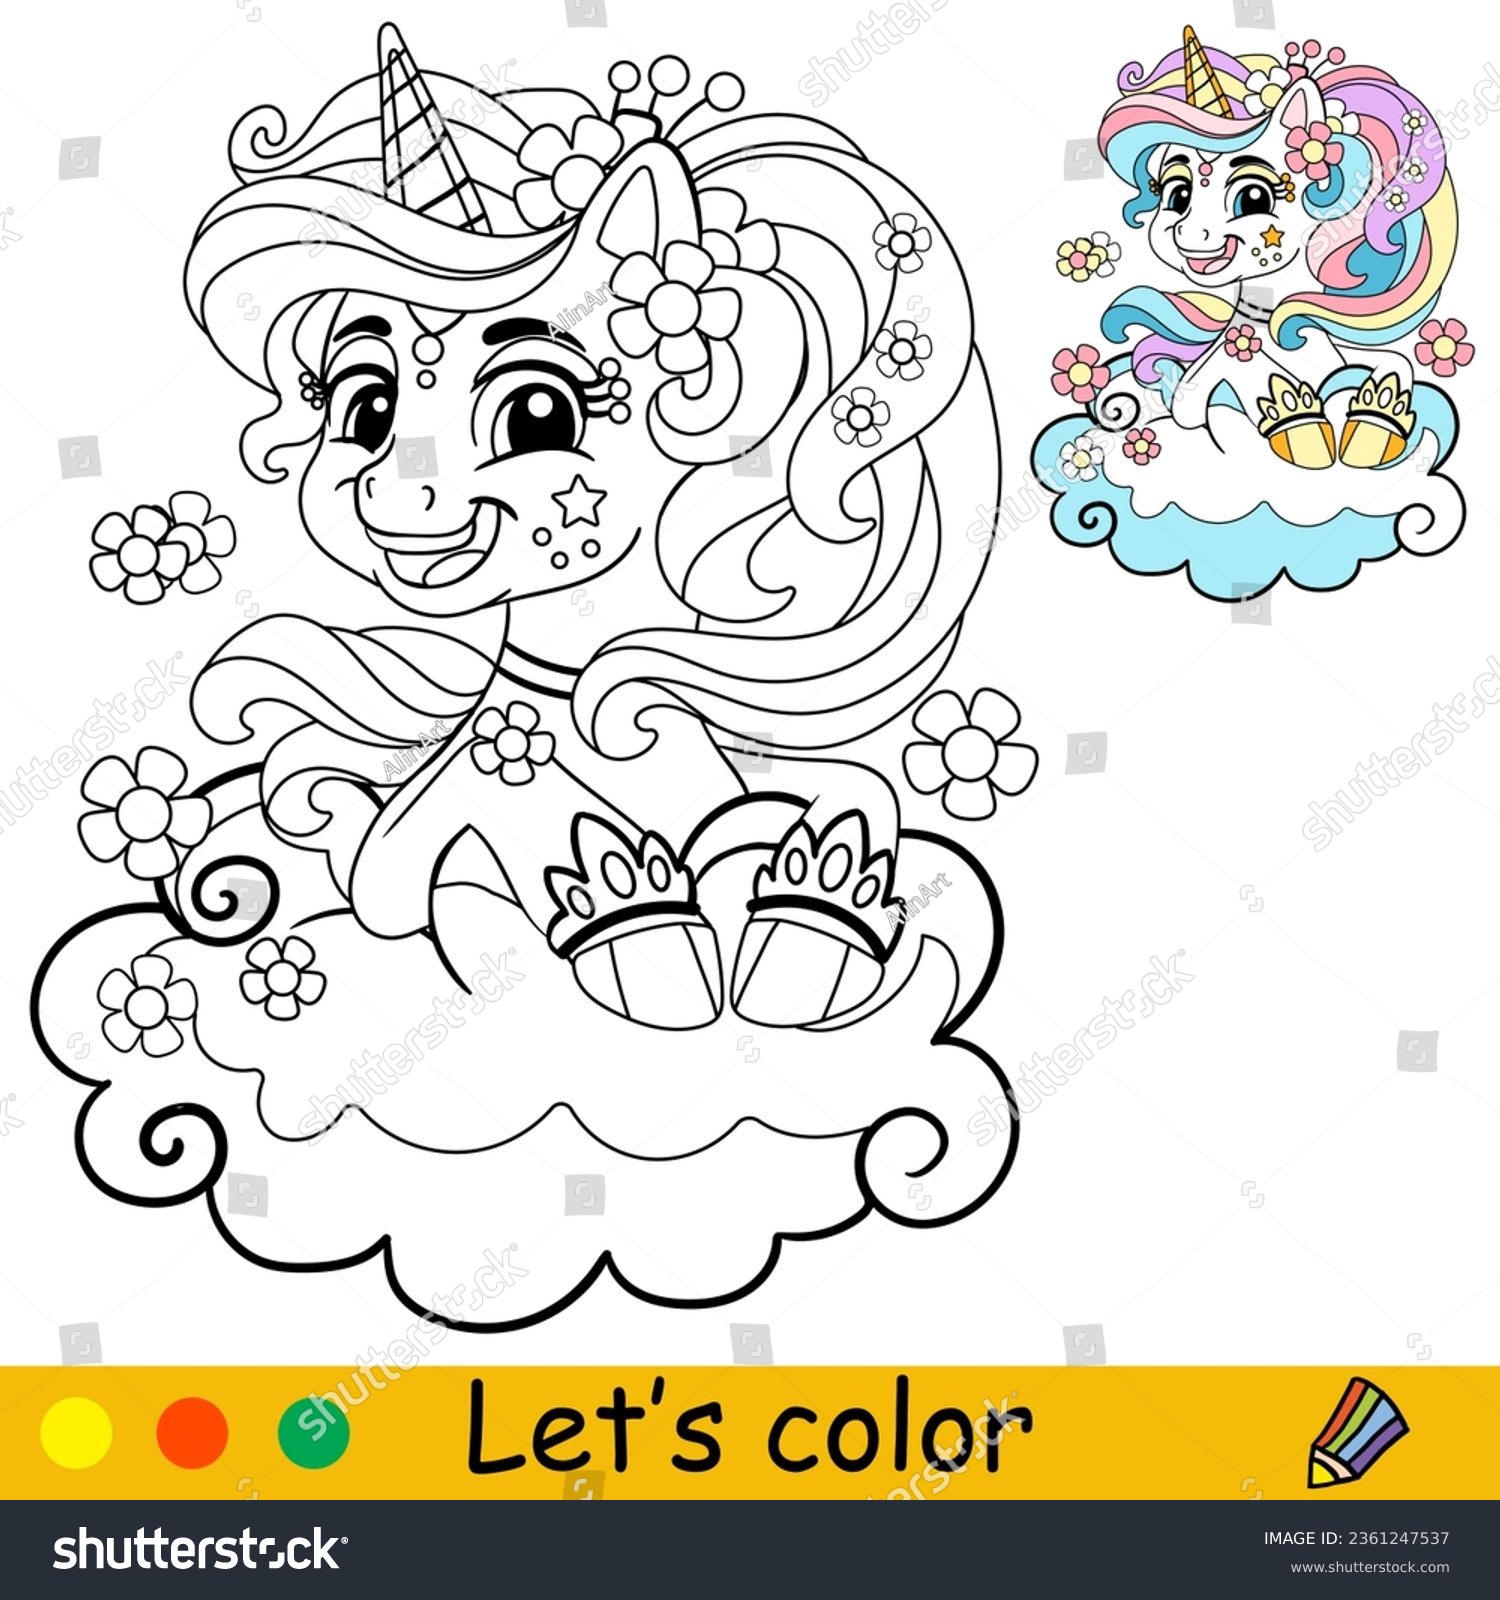 Pony coloring images stock photos d objects vectors